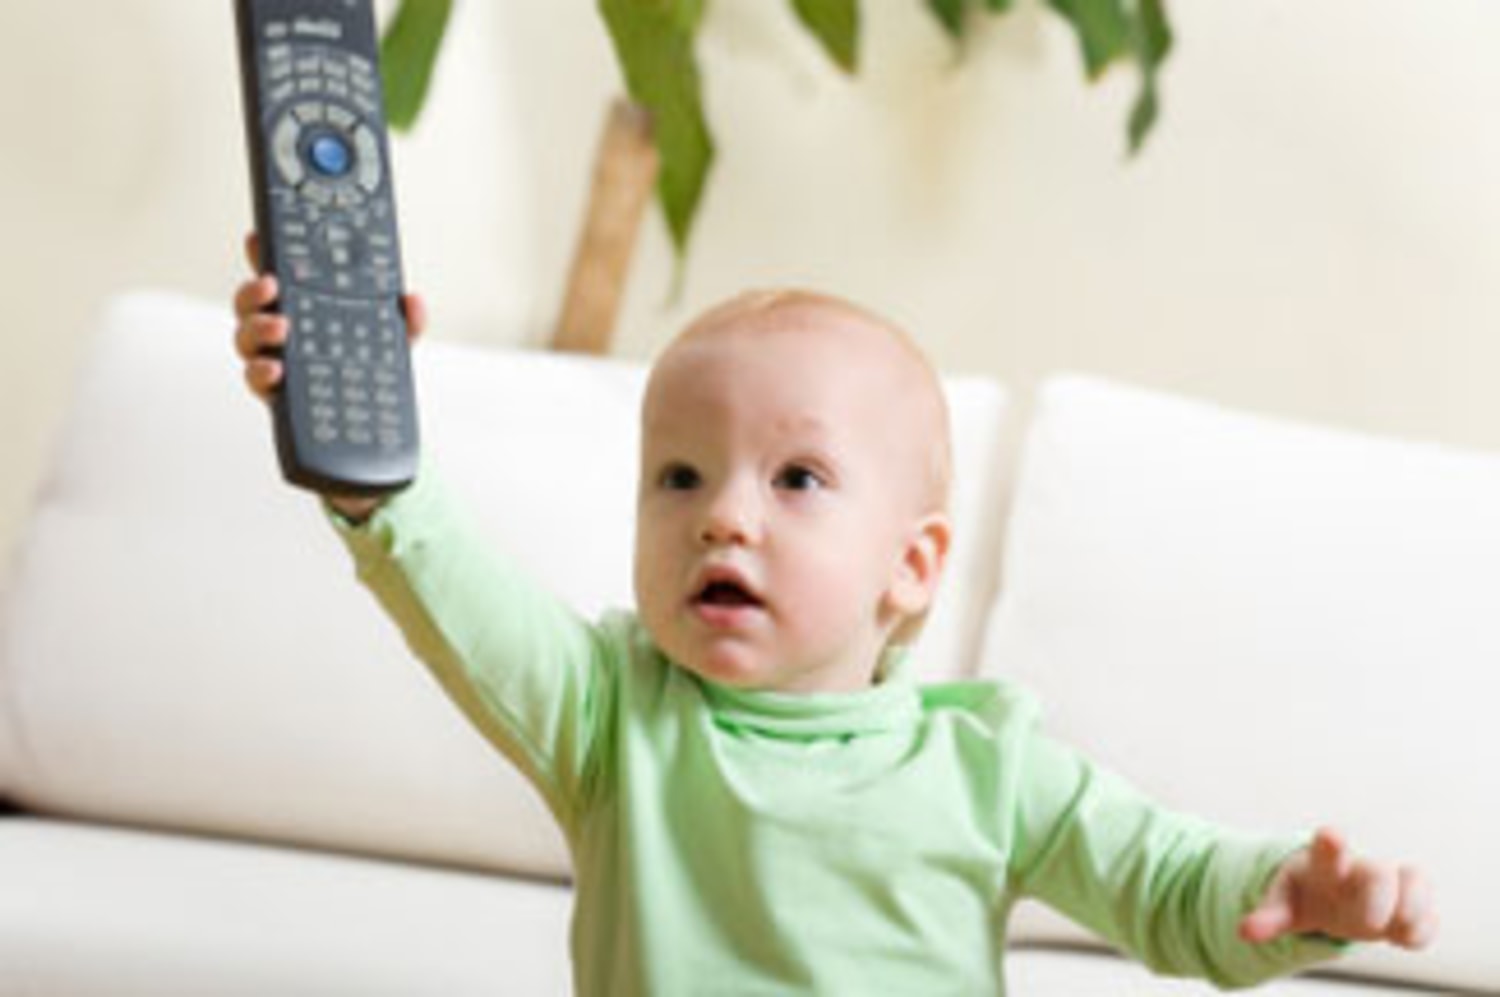 https://media-cldnry.s-nbcnews.com/image/upload/t_fit-1500w,f_auto,q_auto:best/MSNBC/Components/Photo/_new/101103_techlicious_baby-holding-remote-325px.jpg